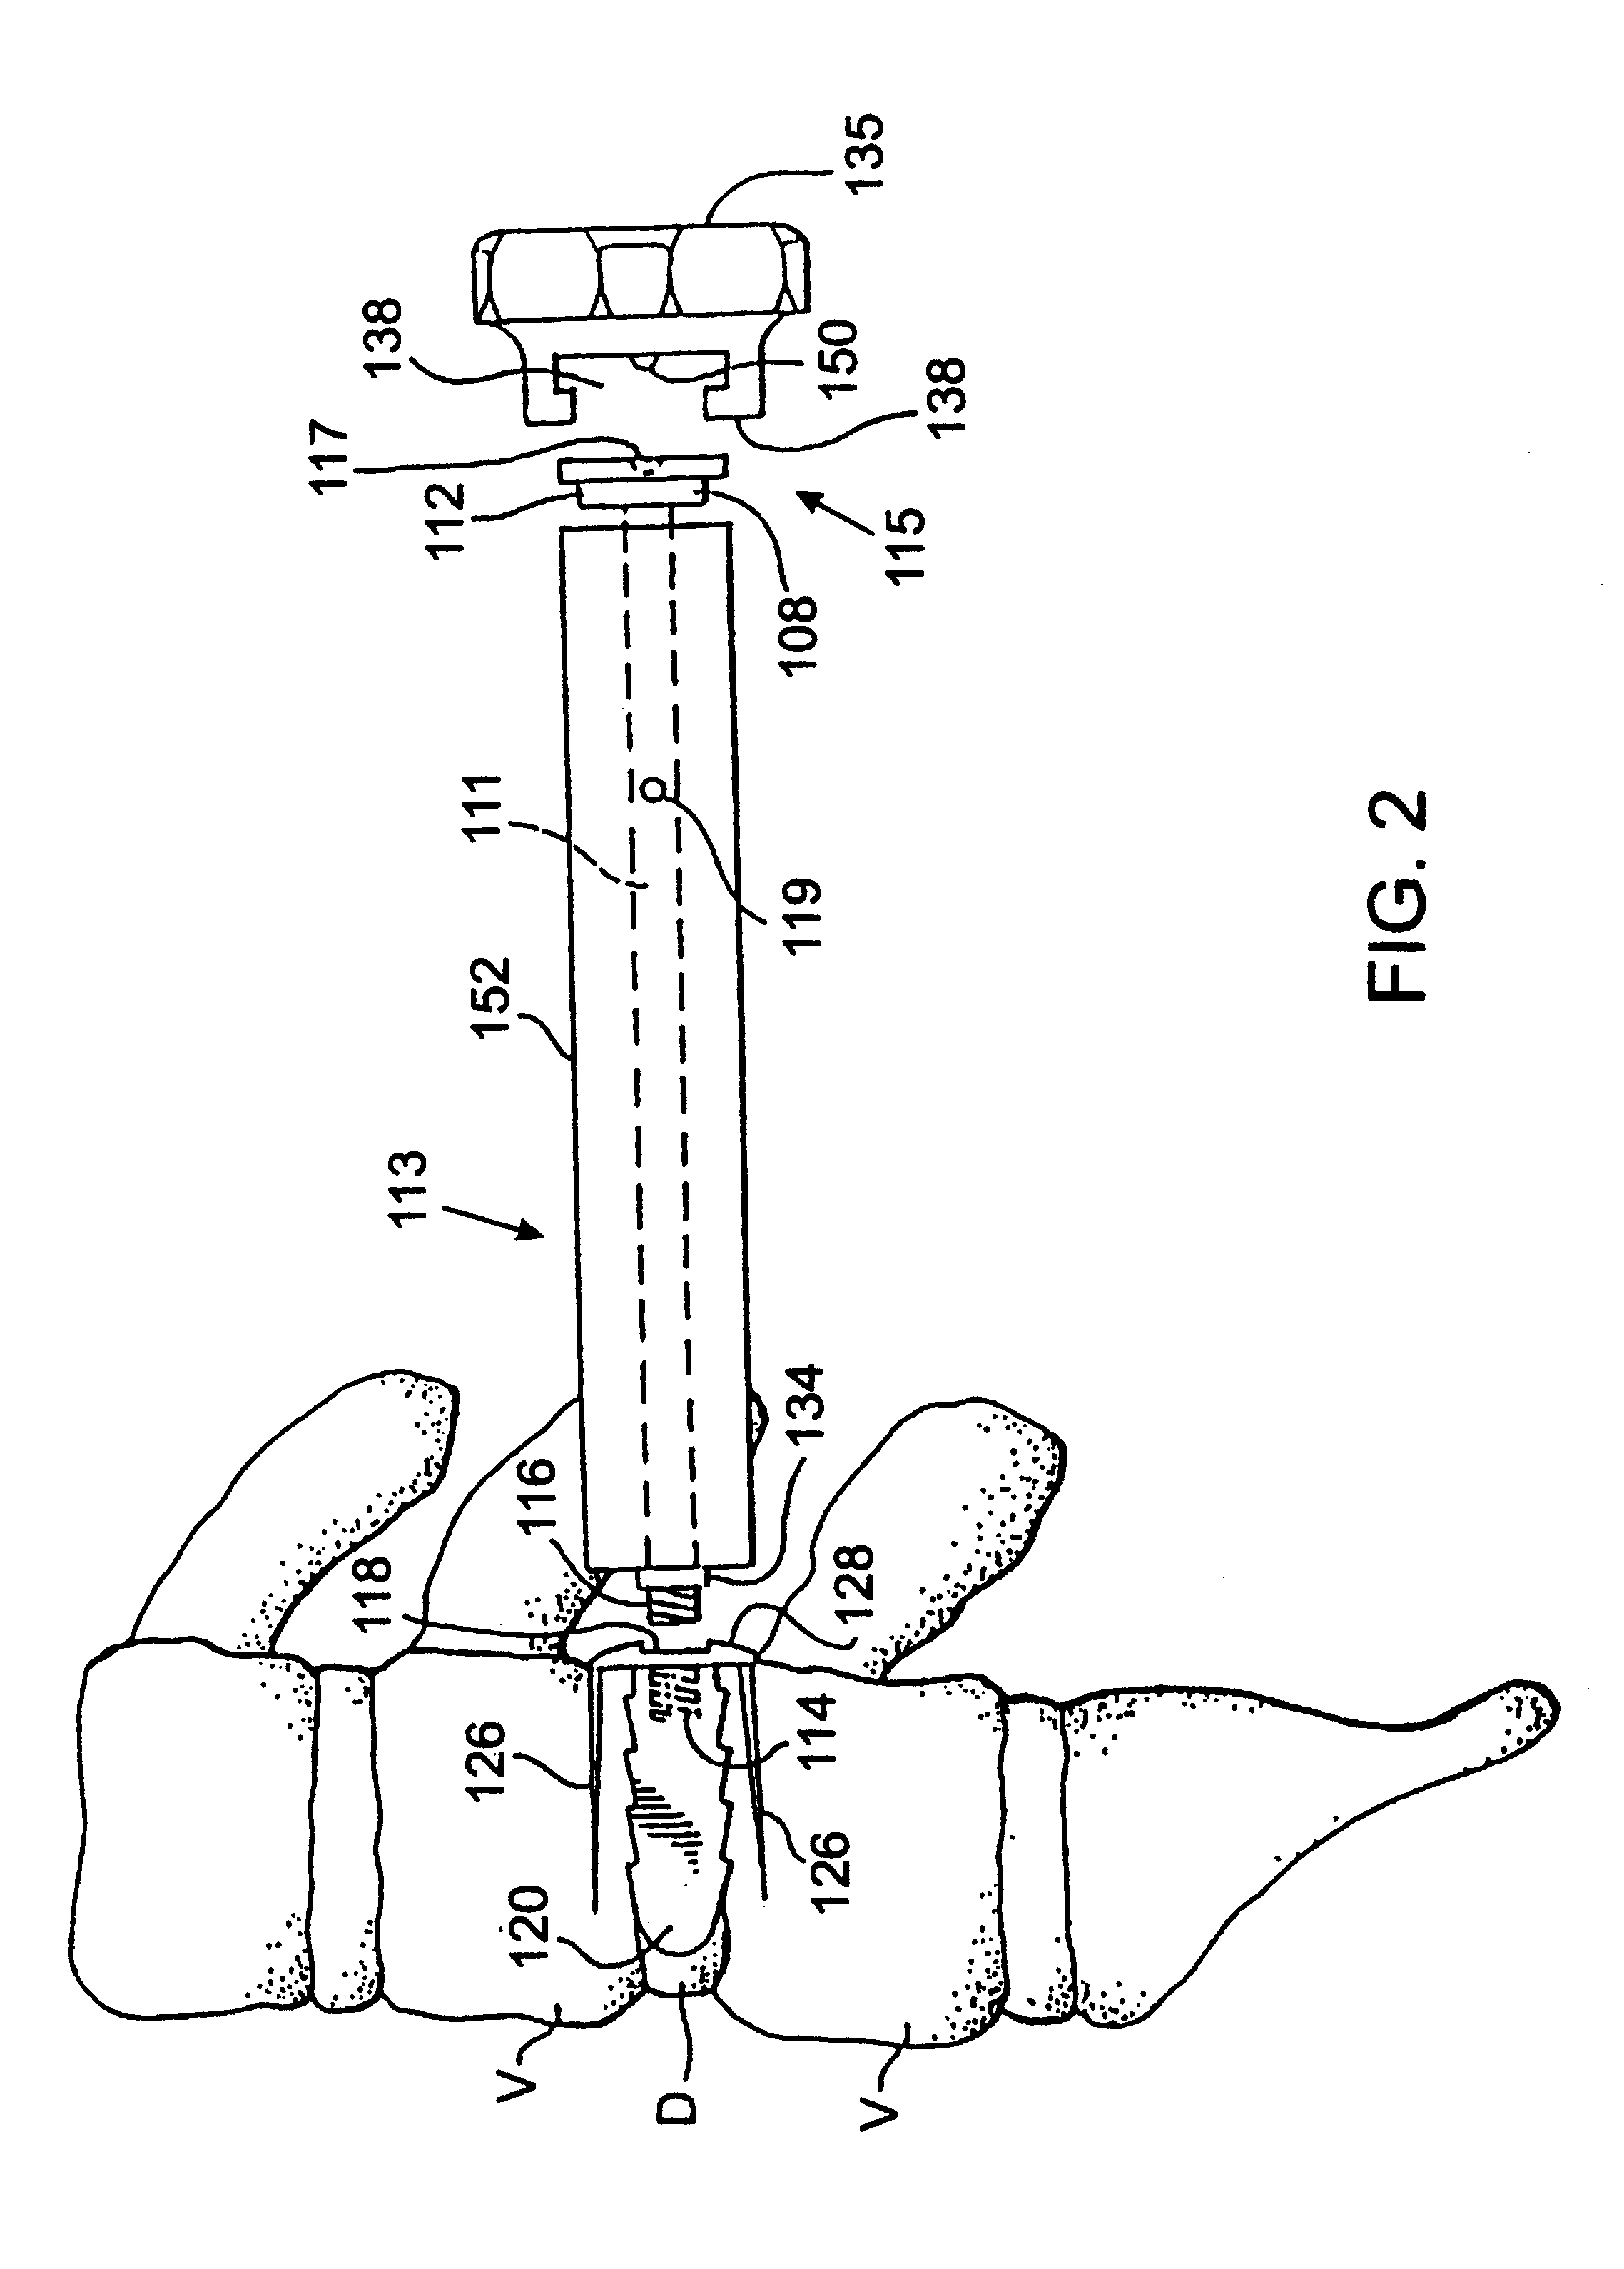 Apparatus for use in inserting spinal implants